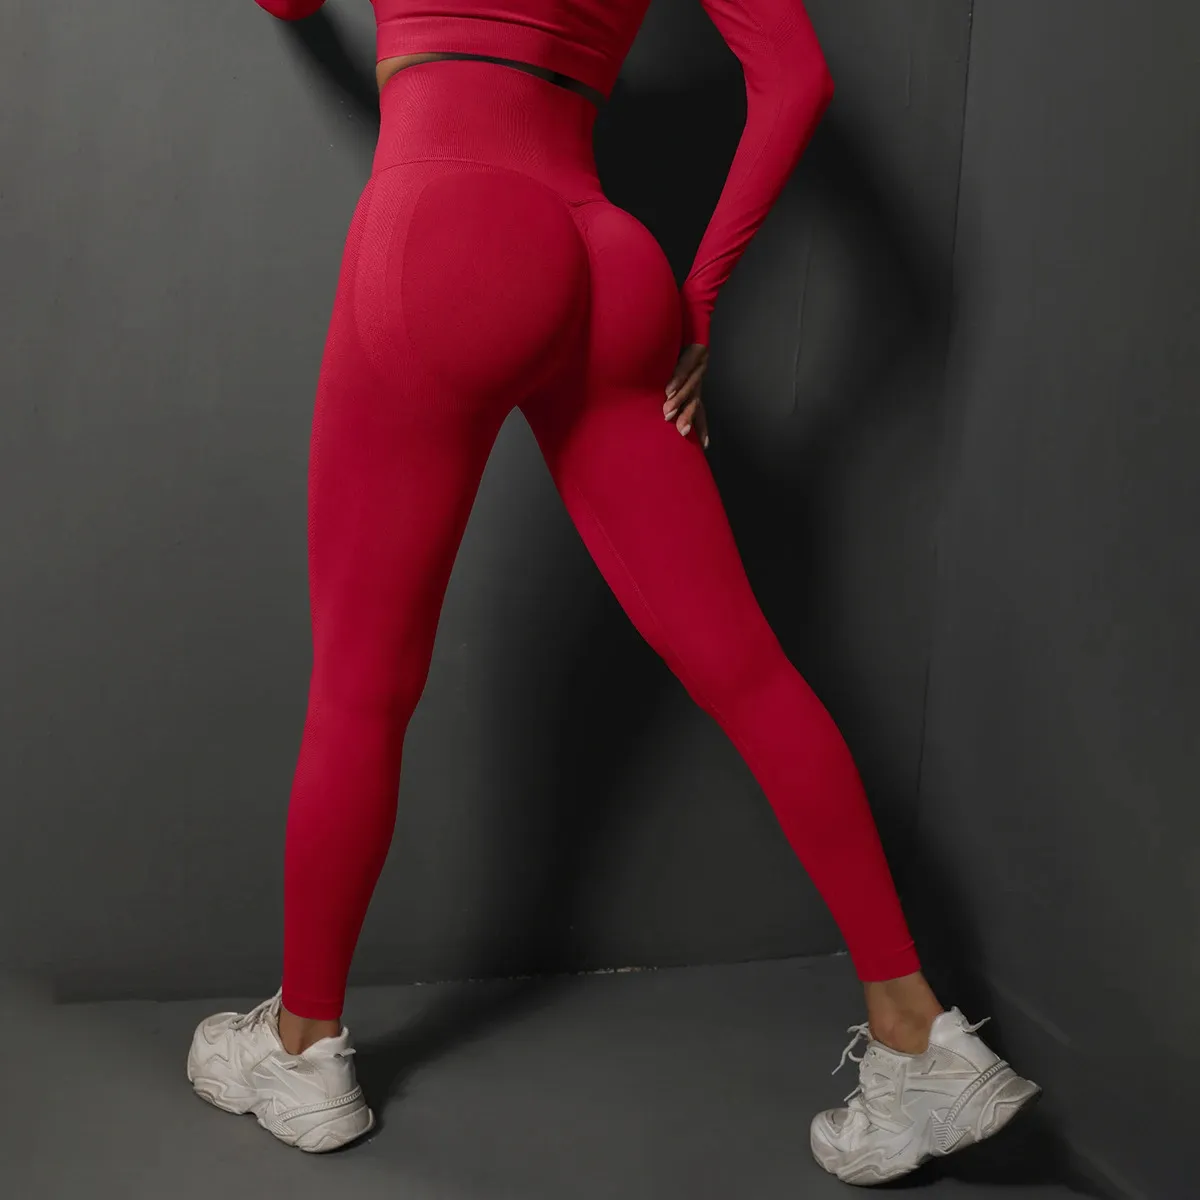 Seamless High Waist Yoga Leggings For Women Booty Lifting Gym Outfit, Sexy  Sports Clothing For Tight Gym Wear Style 231114 From Dao06, $8.3